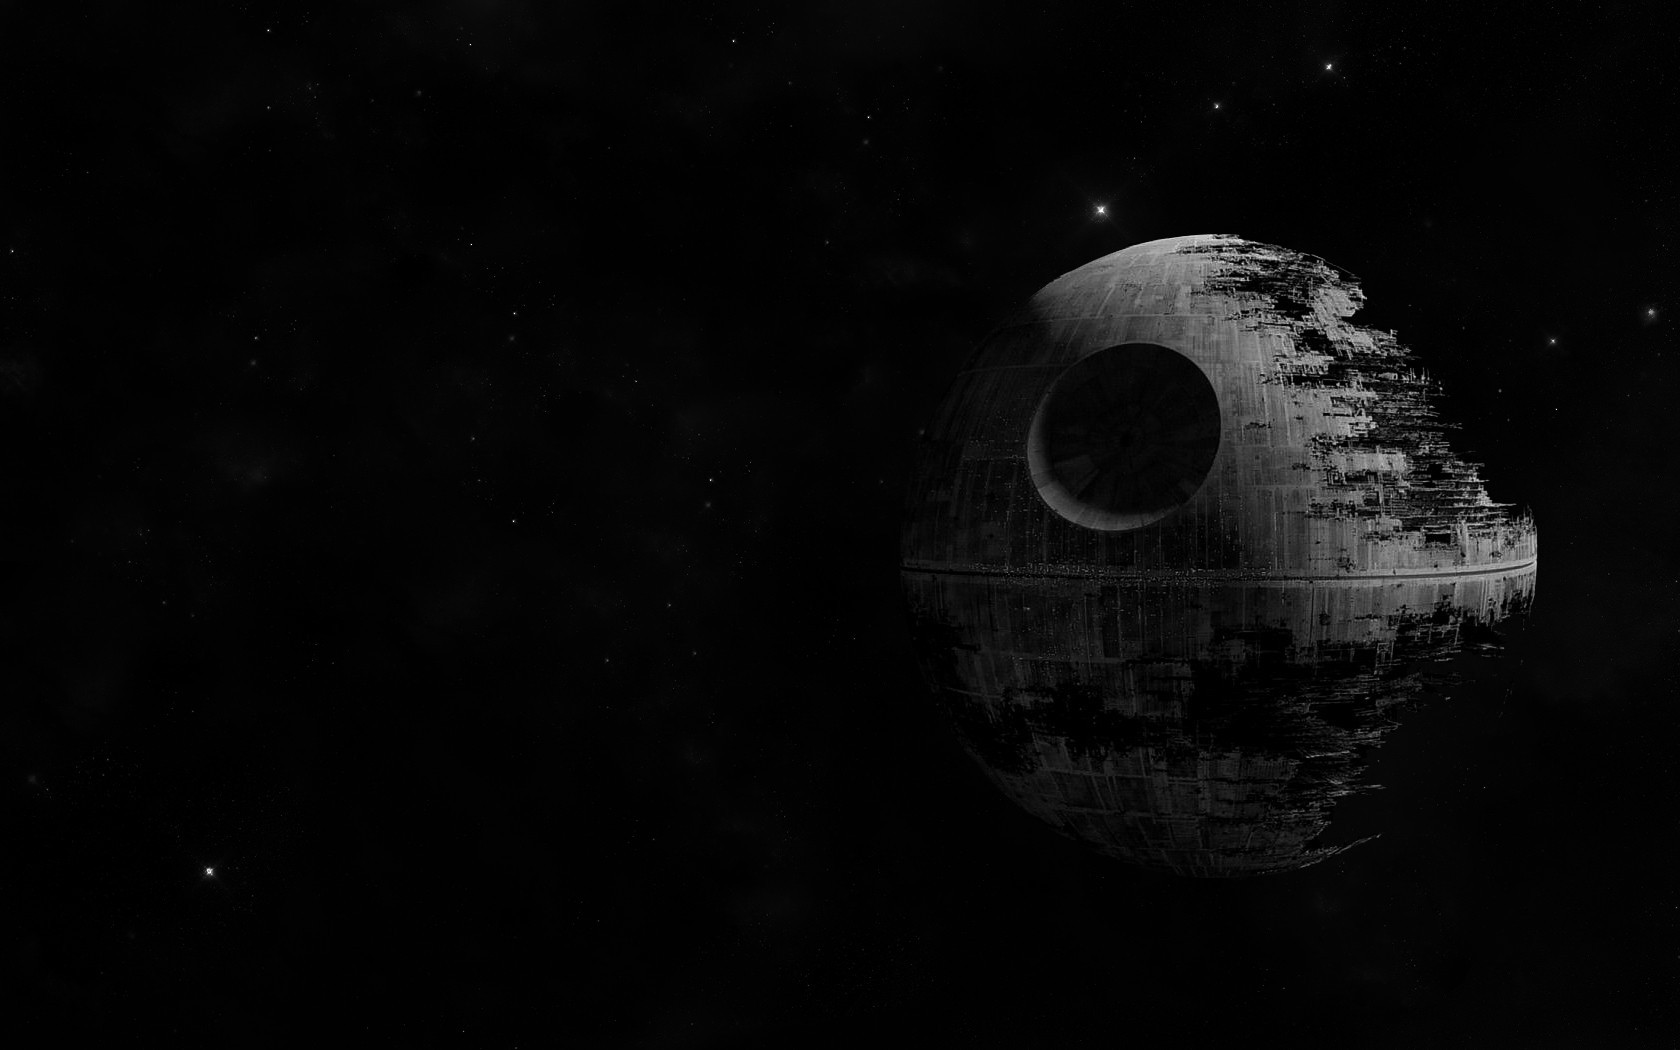 General 1680x1050 Death Star Star Wars: Episode VI - The Return of the Jedi Star Wars movies science fiction